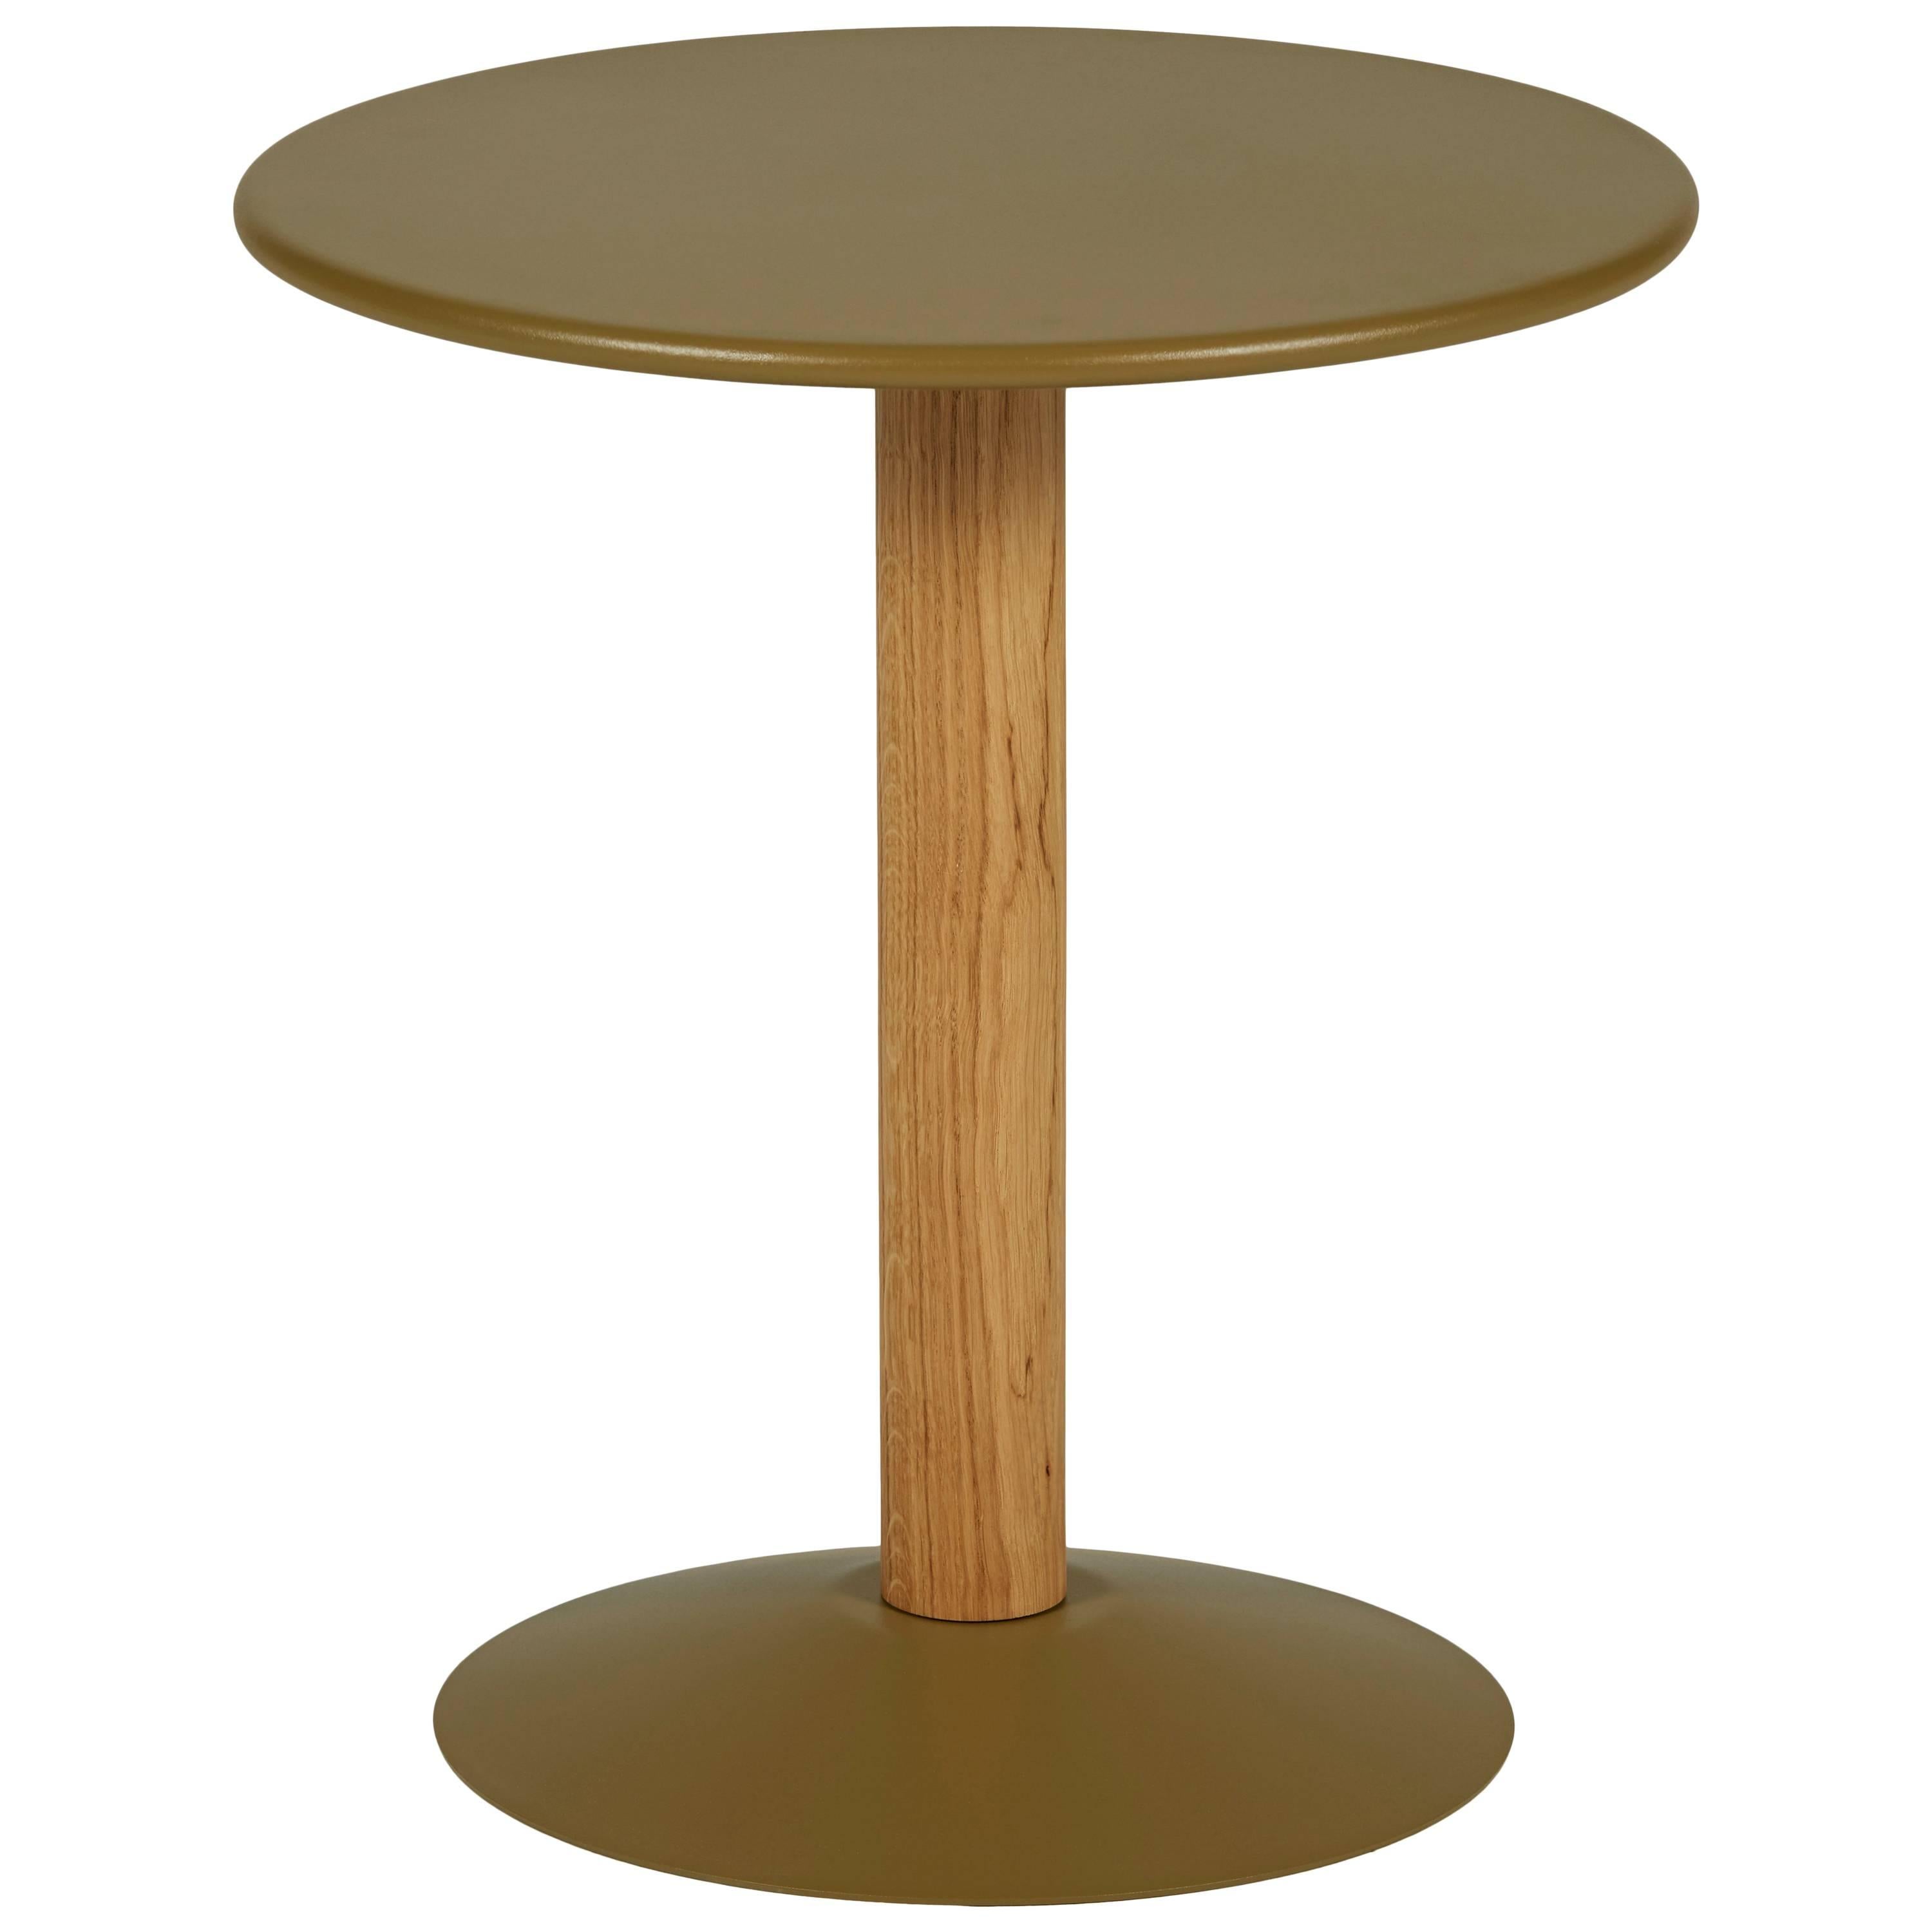 C16 Round Pedestal Table in Khaki with Wood Column by Chantal Andriot & Tolix